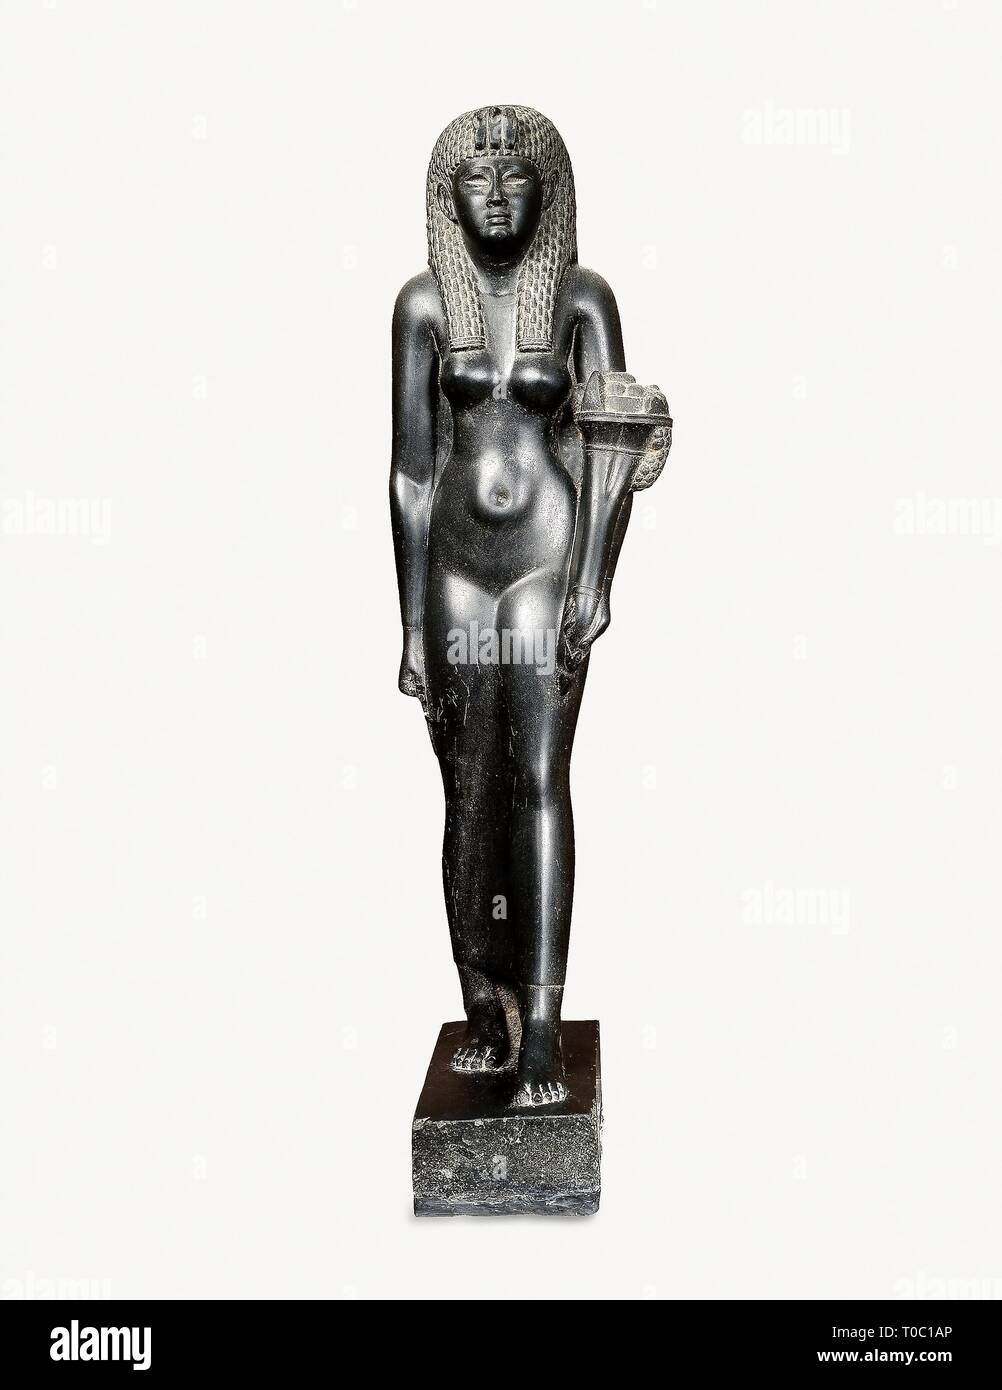 'Sculpture of Cleopatra'. Ancient Egypt, 1rd century BC. Ptolemaic Dynasty. Dimensions: h. 104,7 cm. Museum: State Hermitage, St. Petersburg. Stock Photo